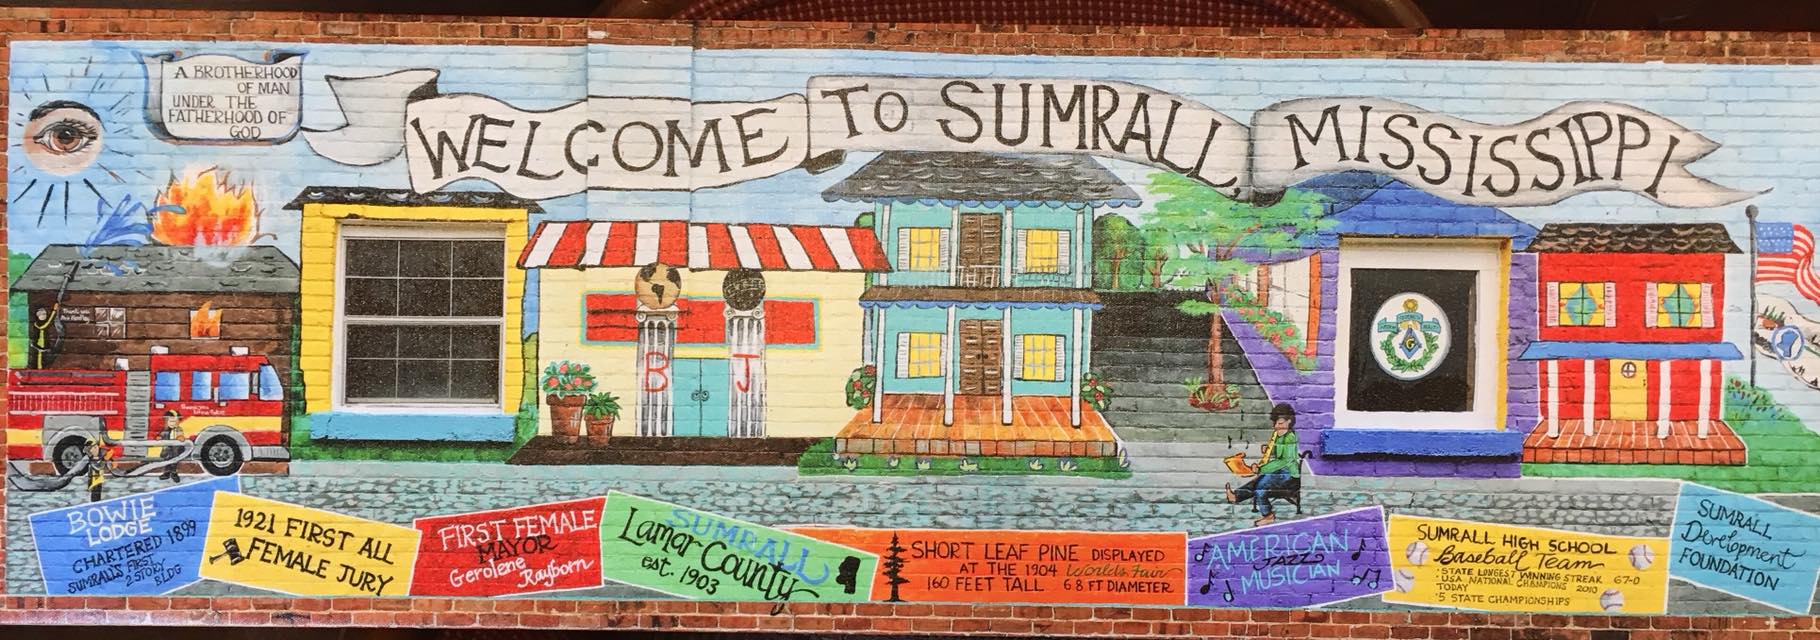 Sumrall, MS Mural